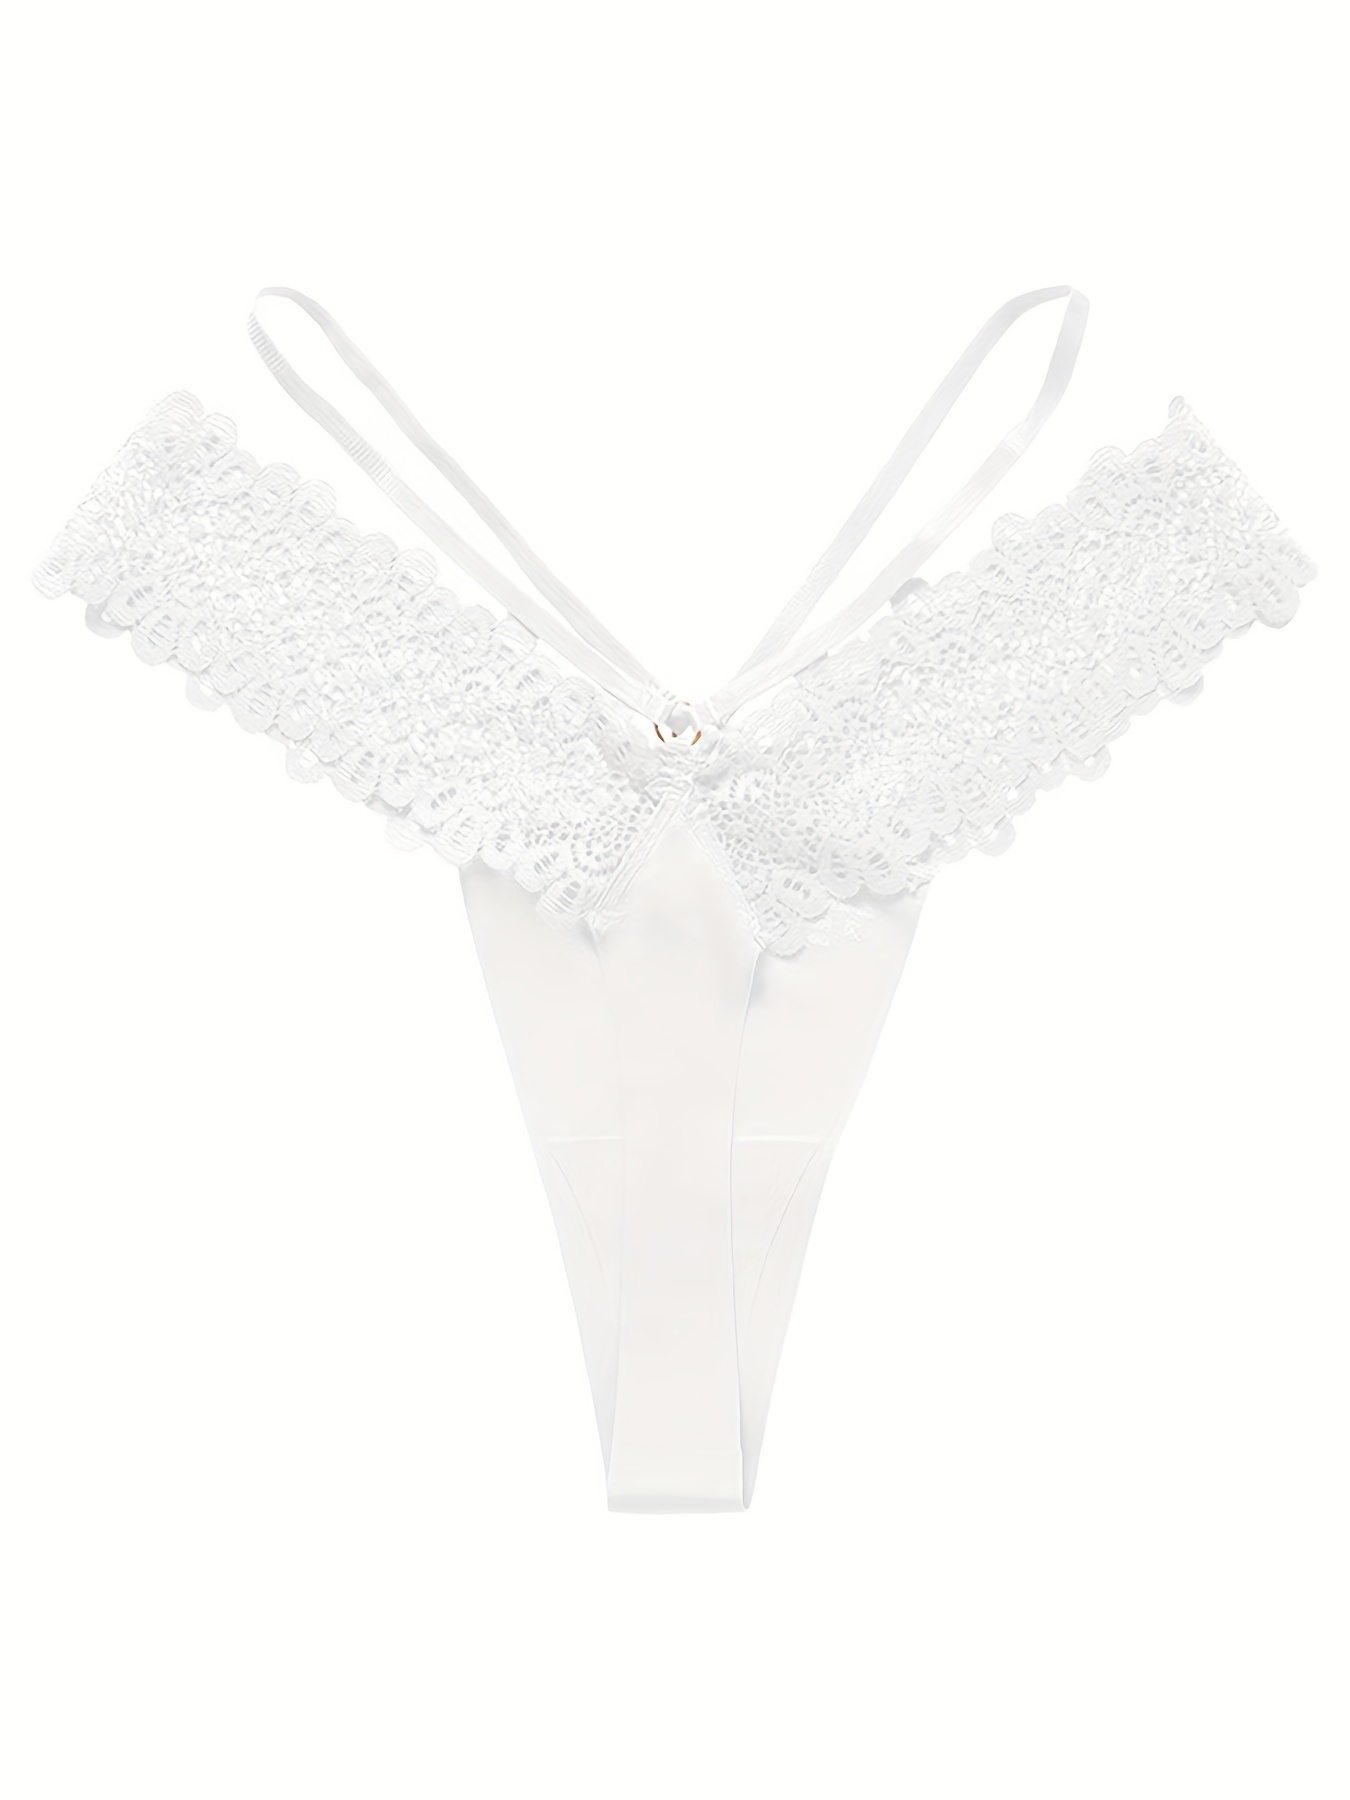 Lace Cheeky Panties For Teenage Girls Seamless, Solid Color, Low